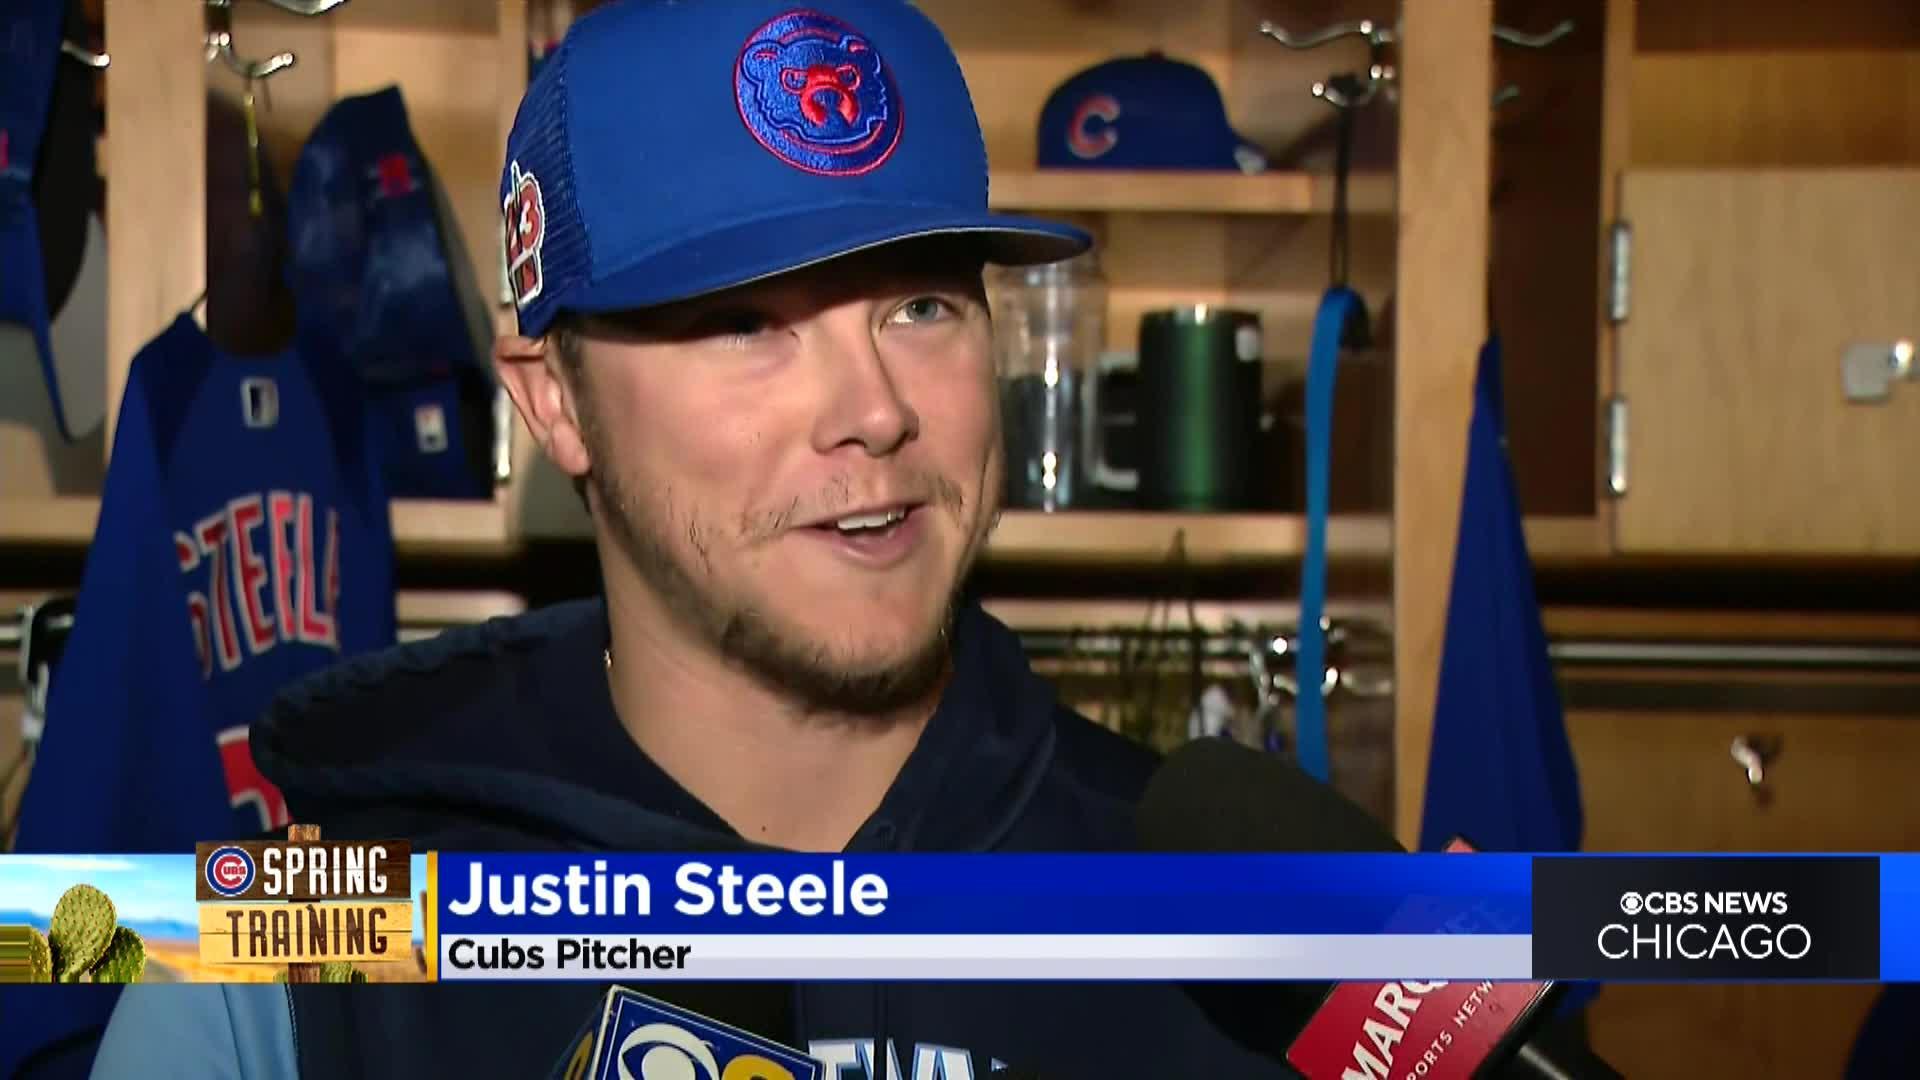 Cubs pitcher Justin Steele looks to continue quality play in